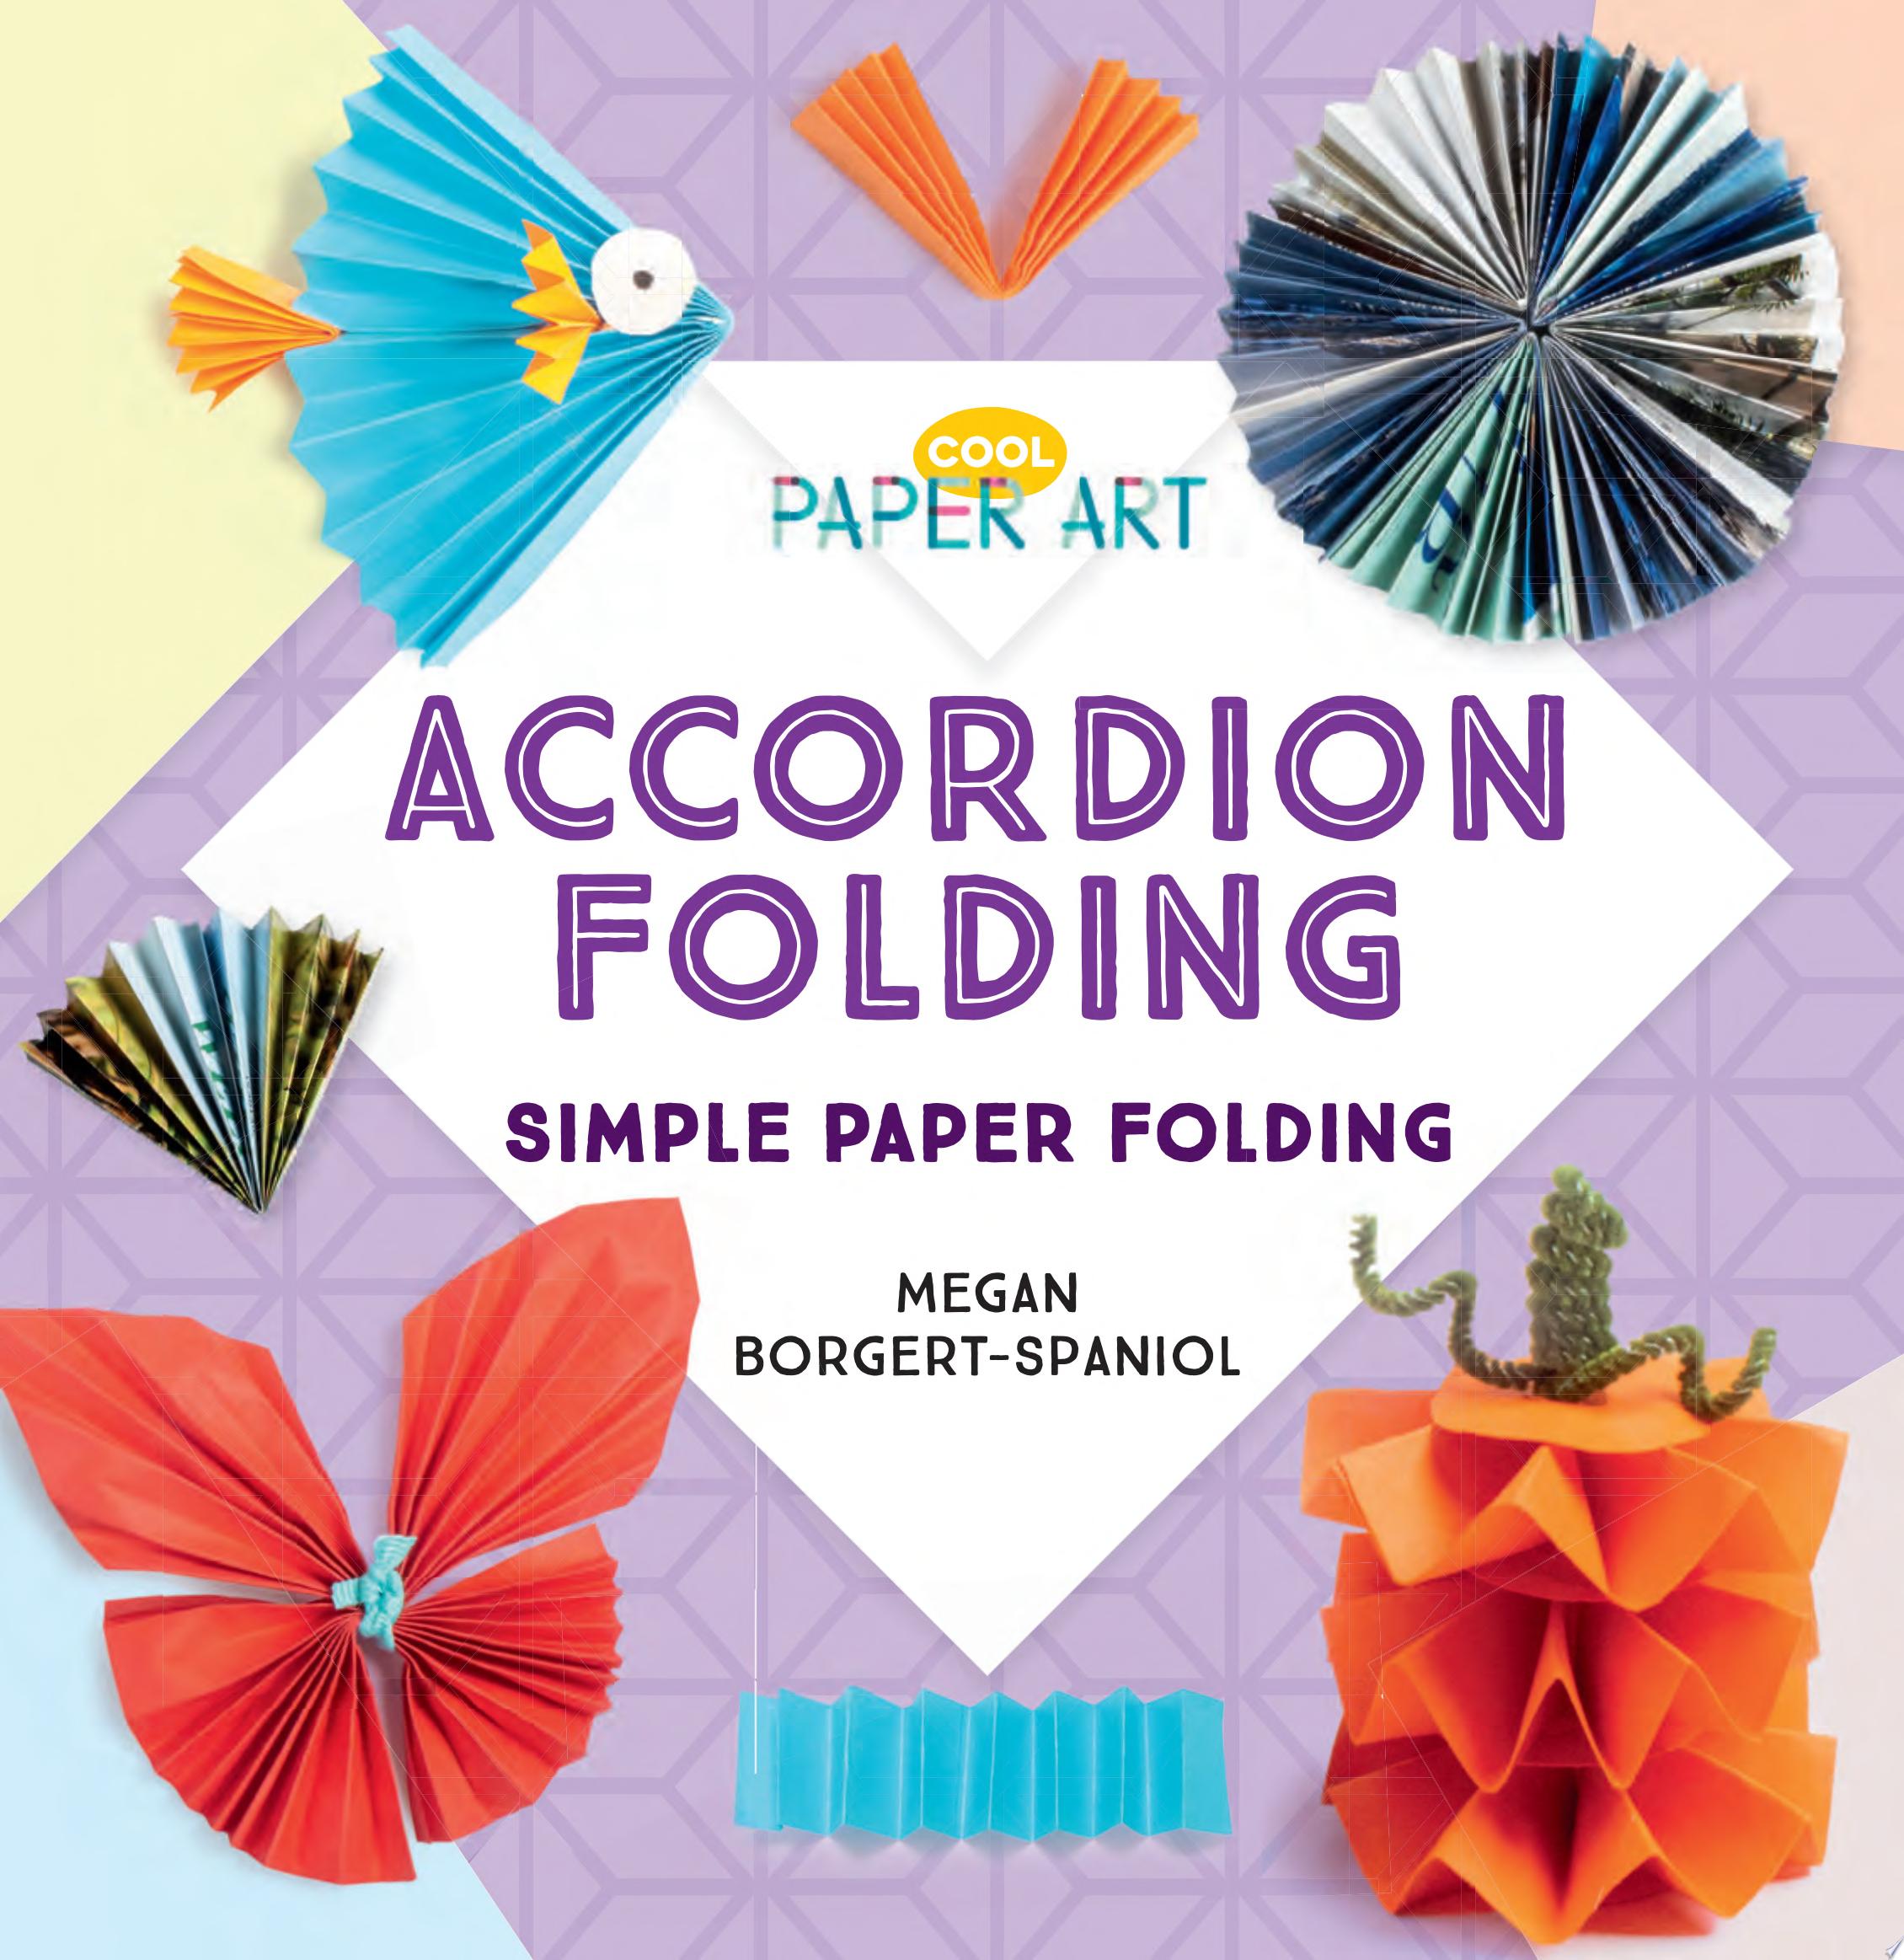 Image for "Accordion Folding: Simple Paper Folding"